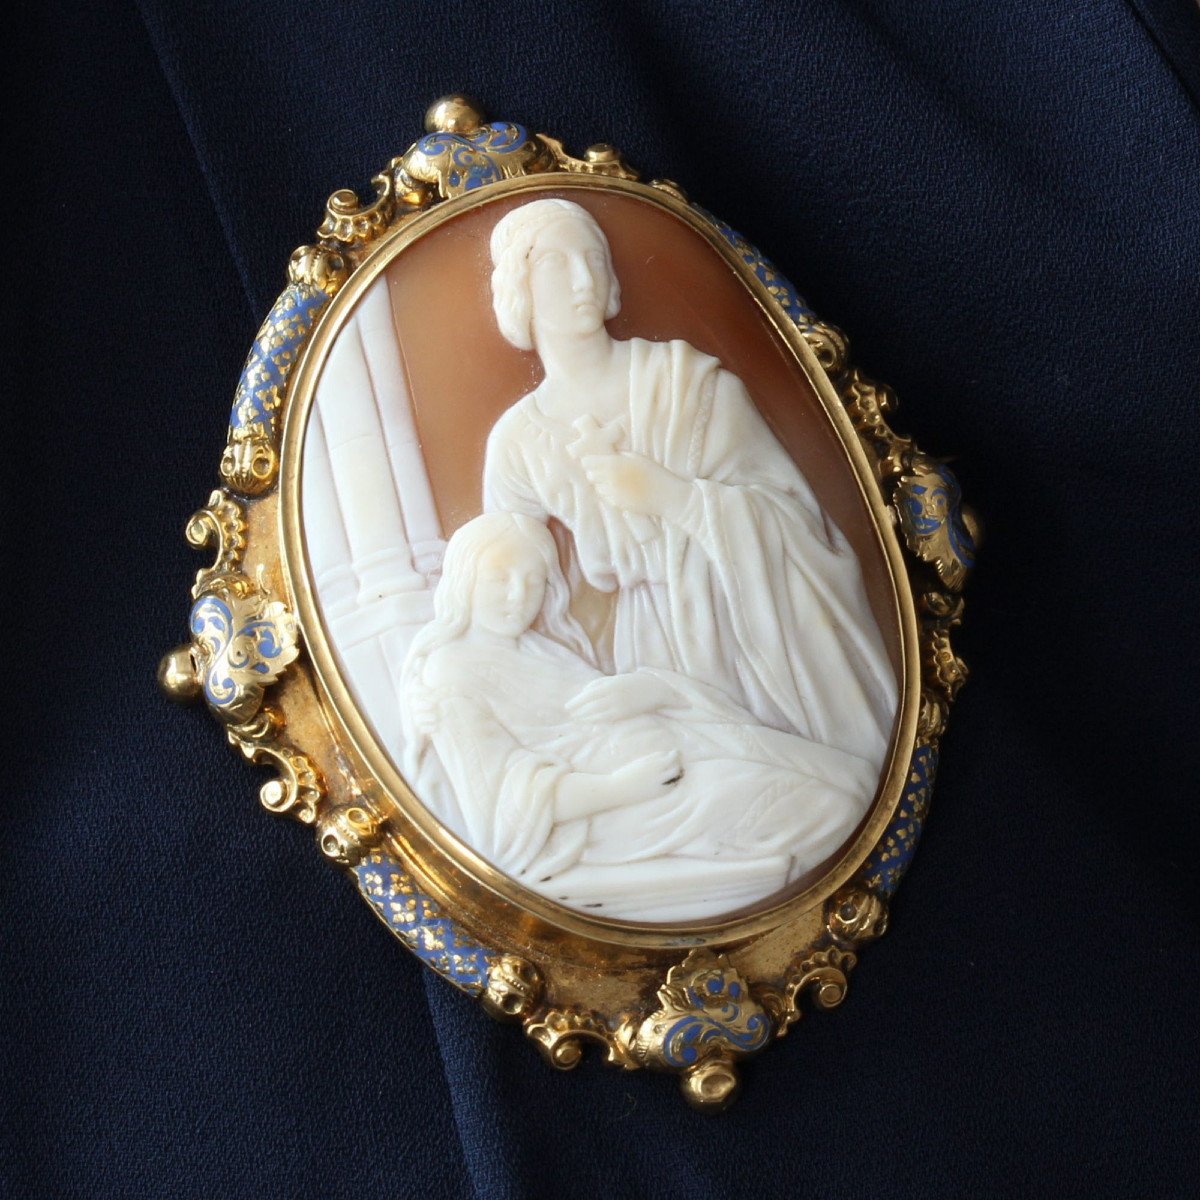 Old Cameo Brooch And Its Blue Enamel-photo-4